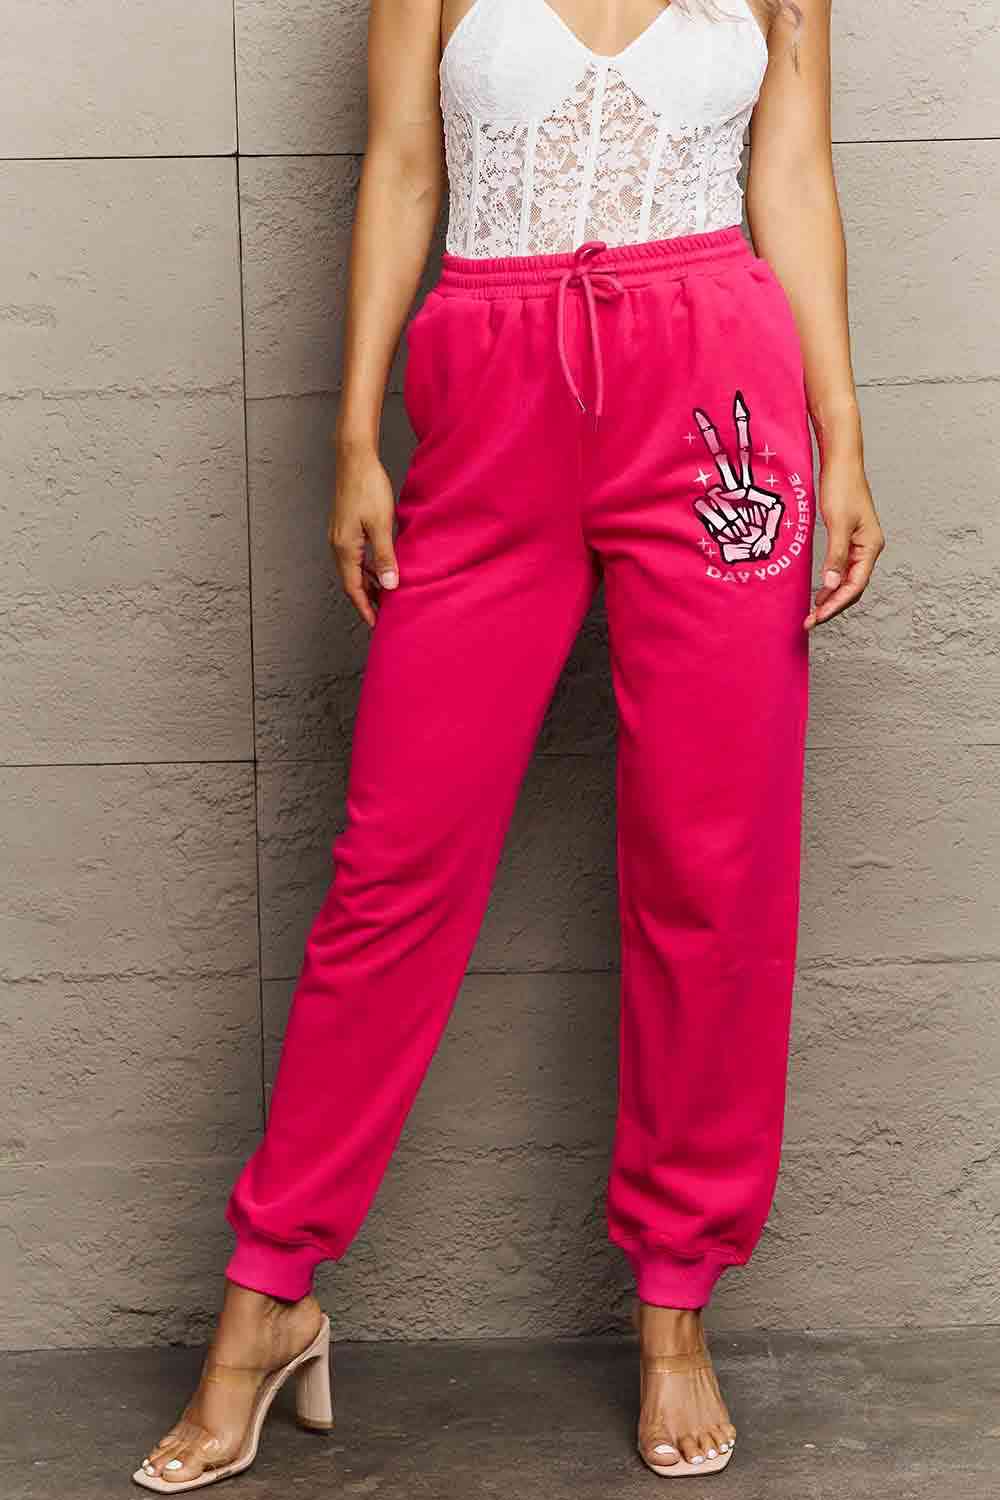 Simply Love Simply Love Full Size Drawstring DAY YOU DESERVE Graphic Long Sweatpants, MyriadMart